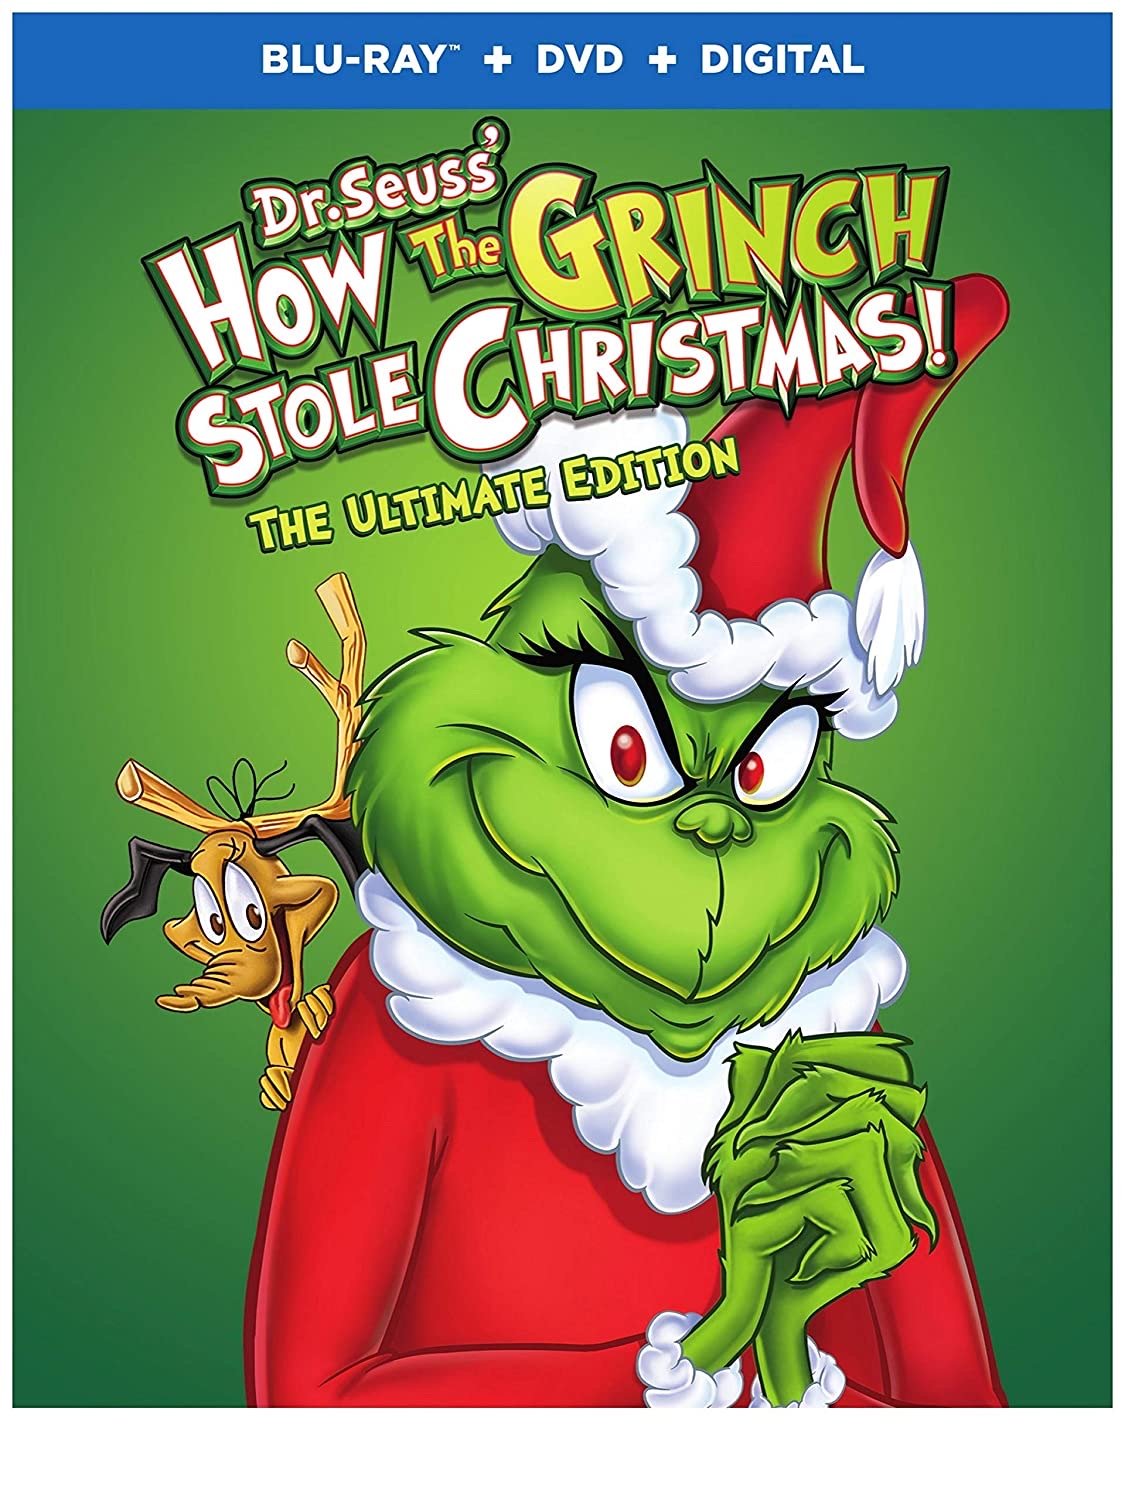 Dr. Suess’ How The Grinch Stole Christmas: The Ultimate Edition (1966) Movies Anywhere HD code